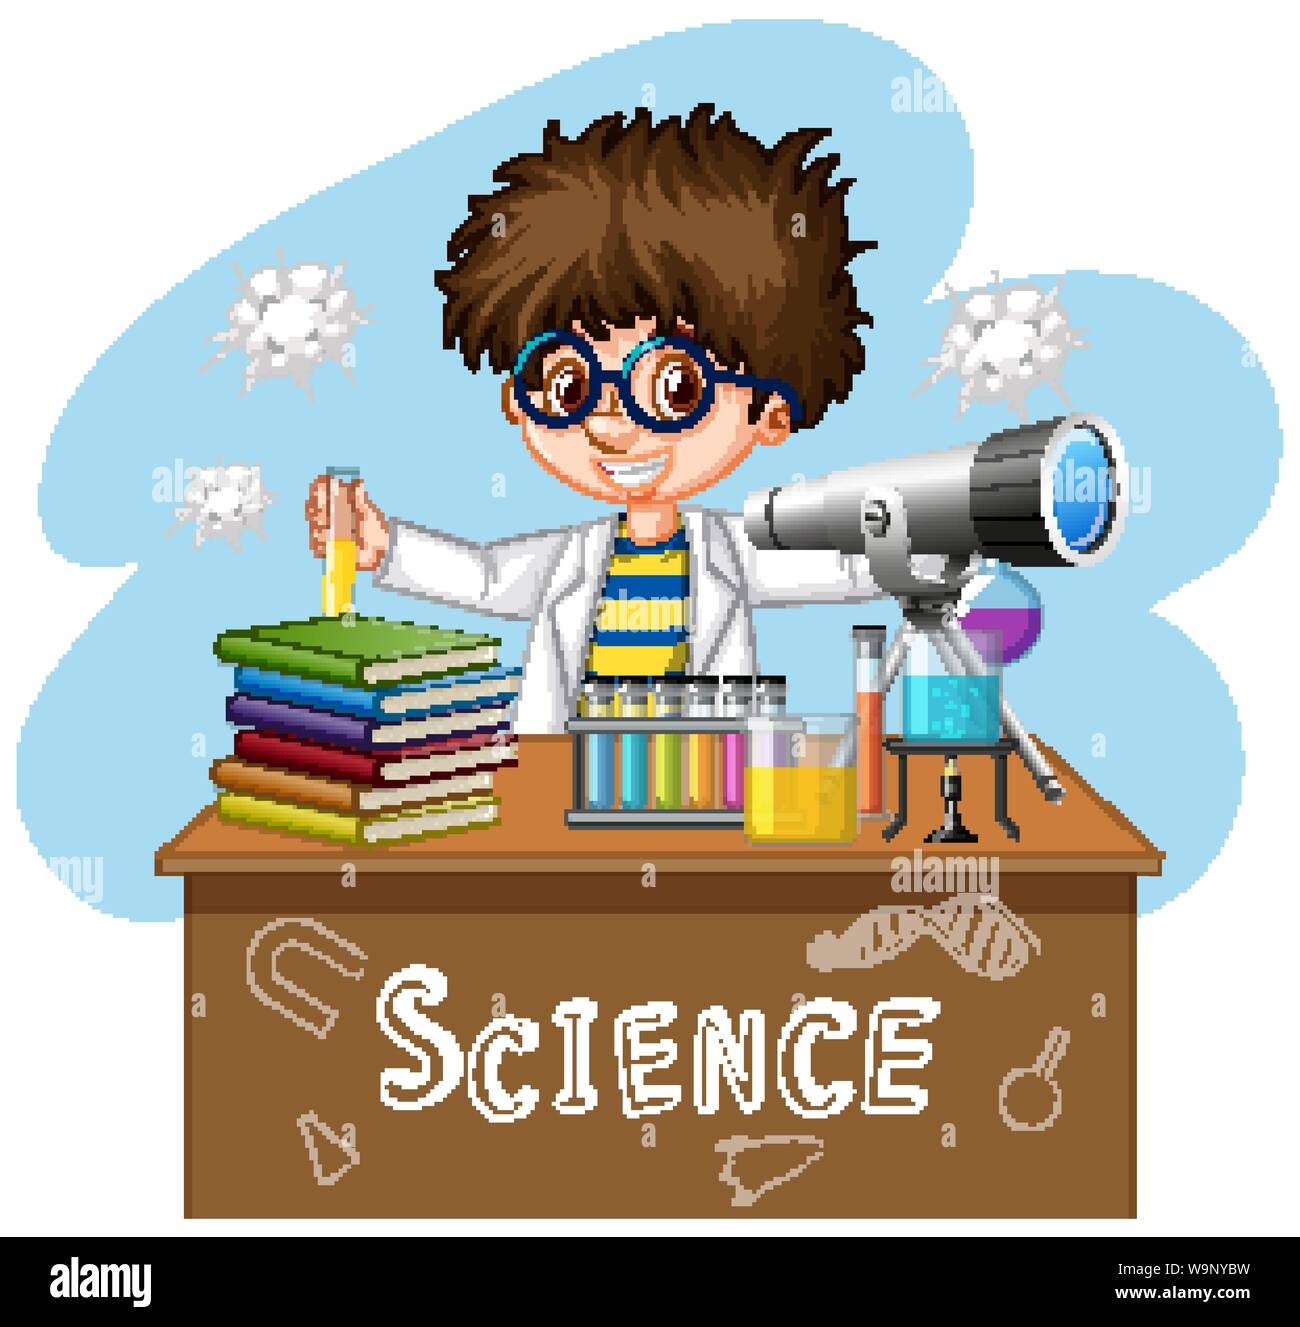 Scientist working with science tools in lab illustration Stock Vector